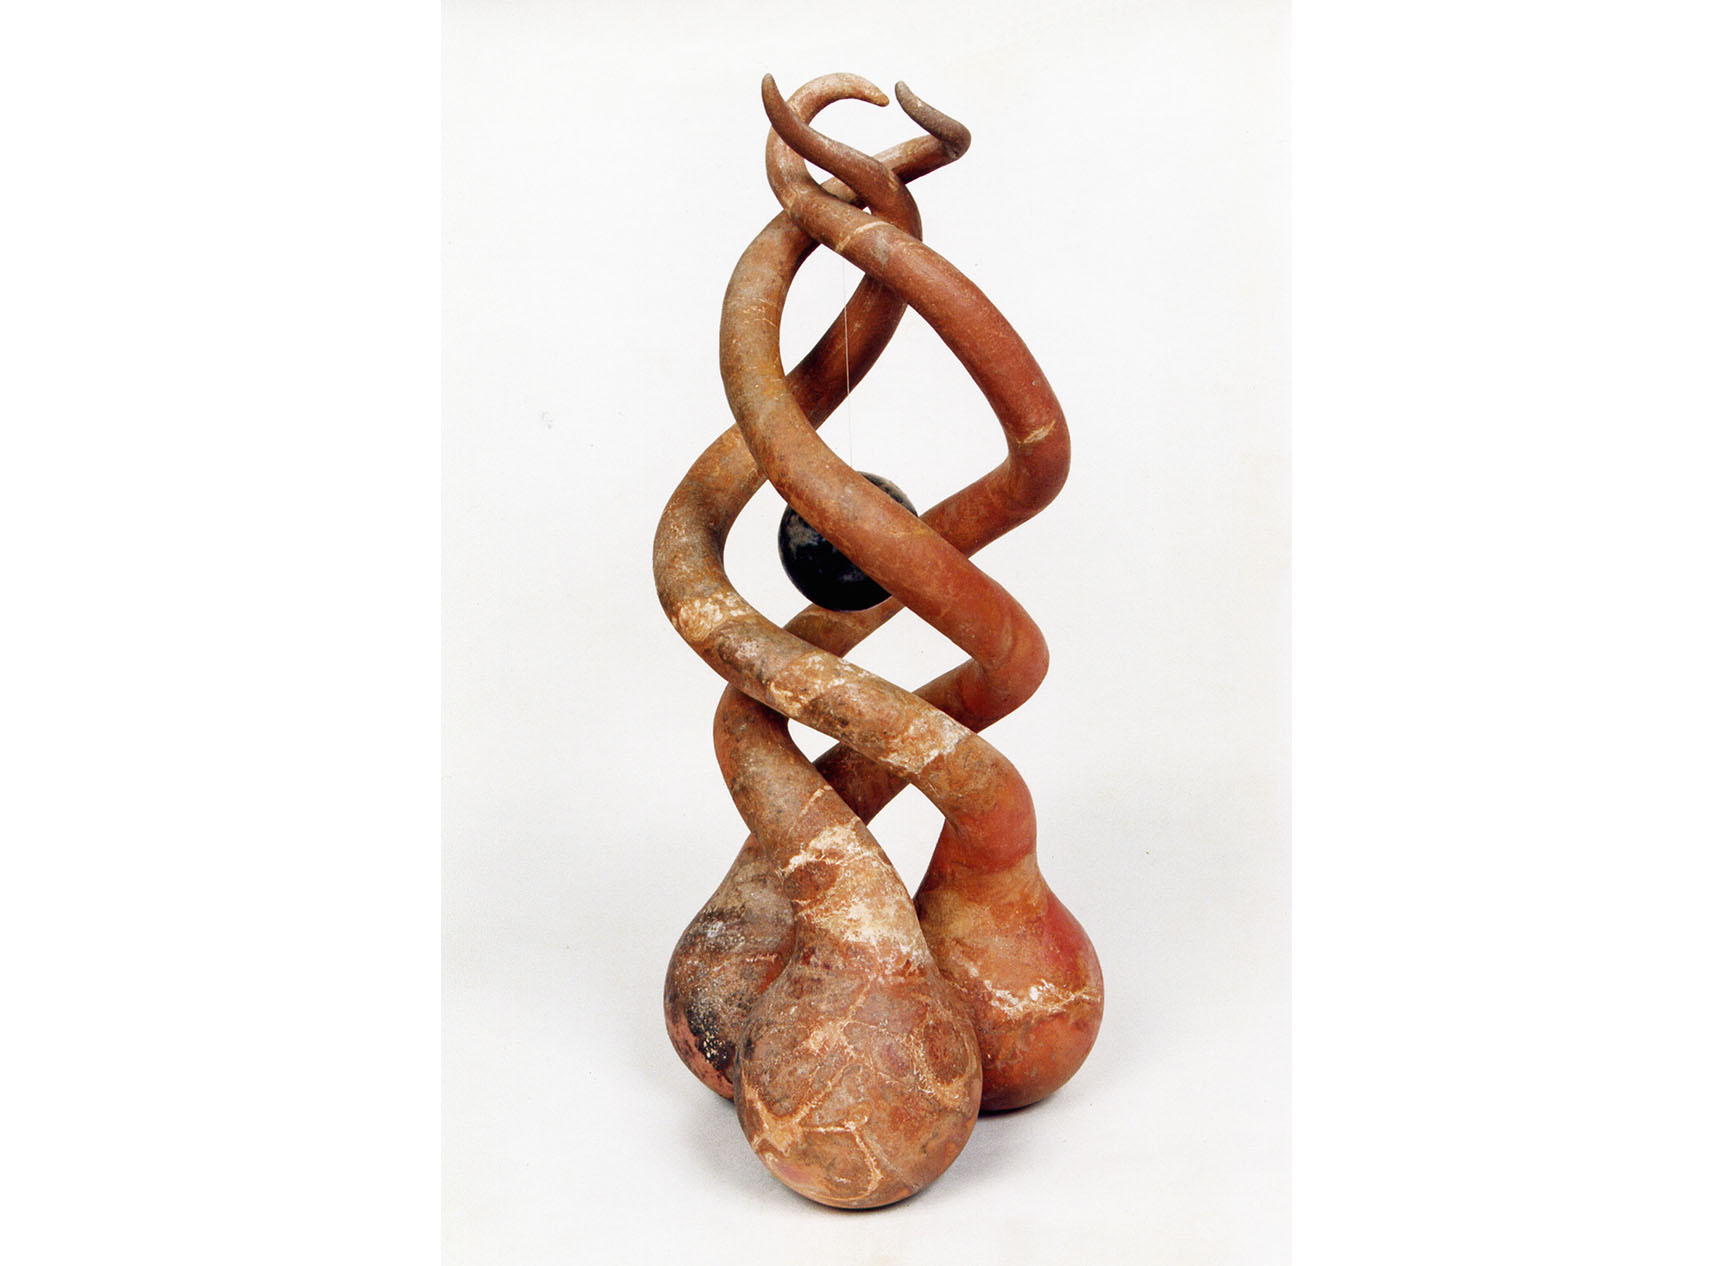 Large twisting natural sculpture, salt fired with various chemicals, called Explorer